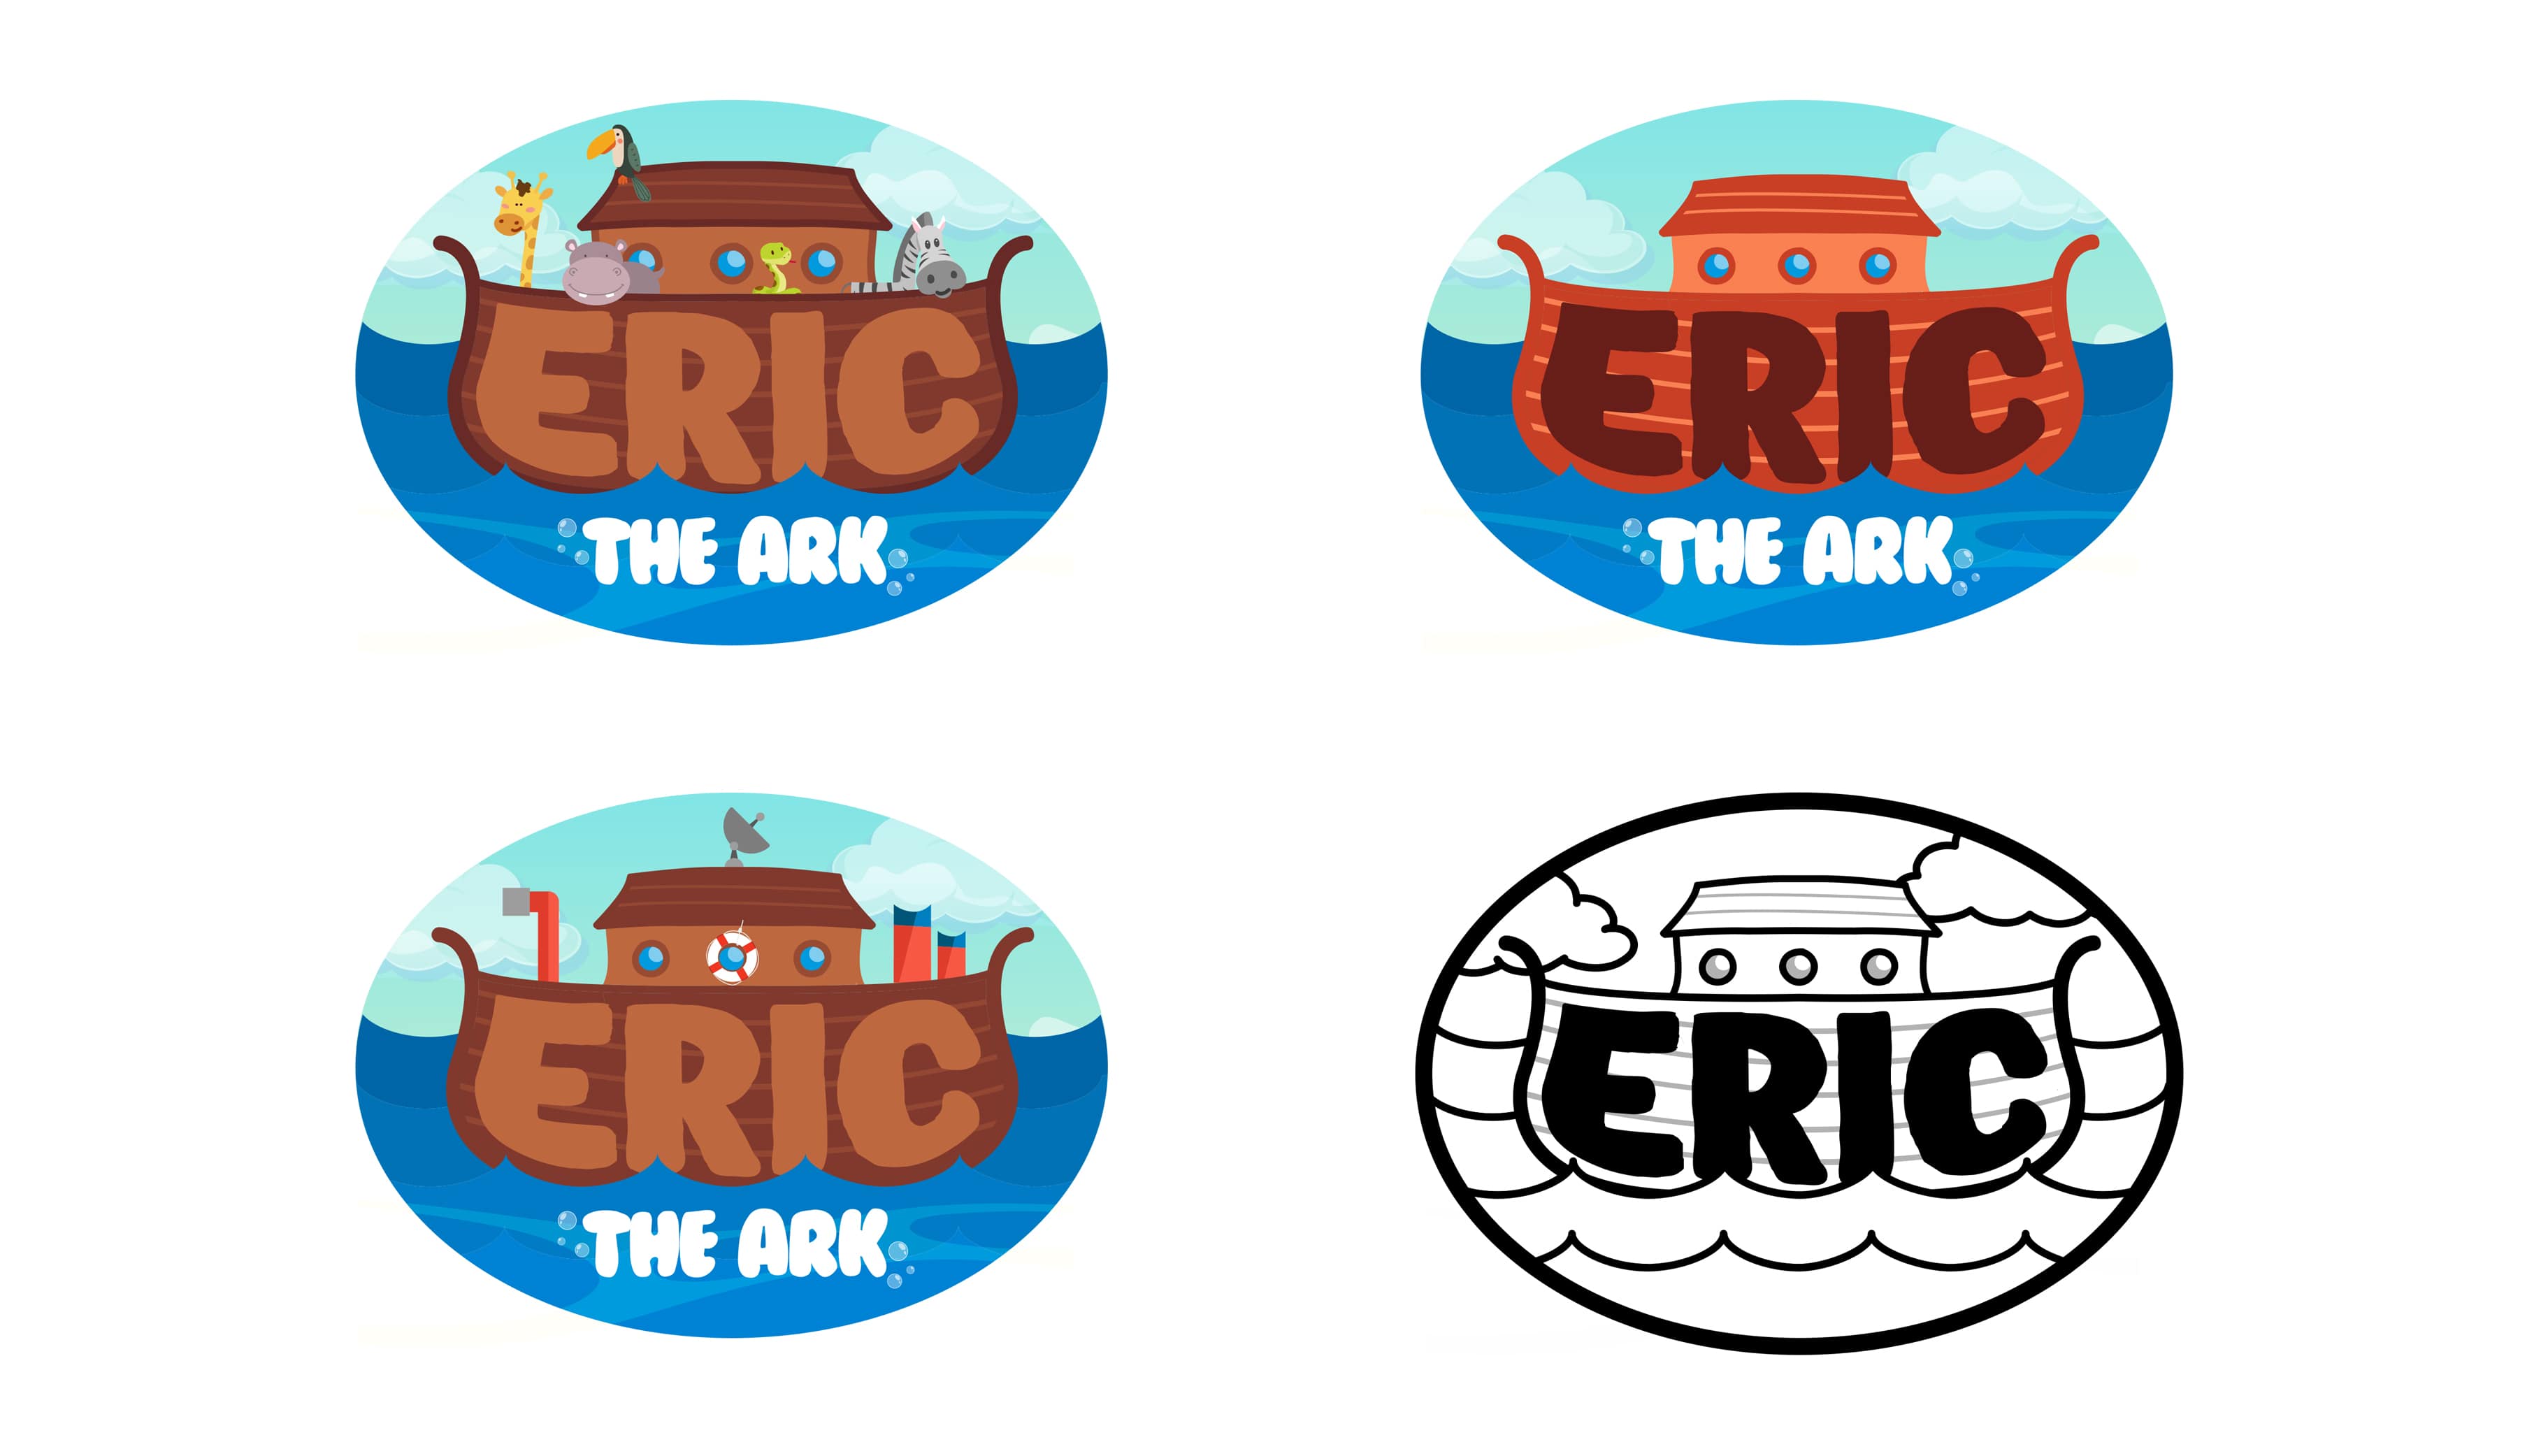 Eric The Ark - Drafts